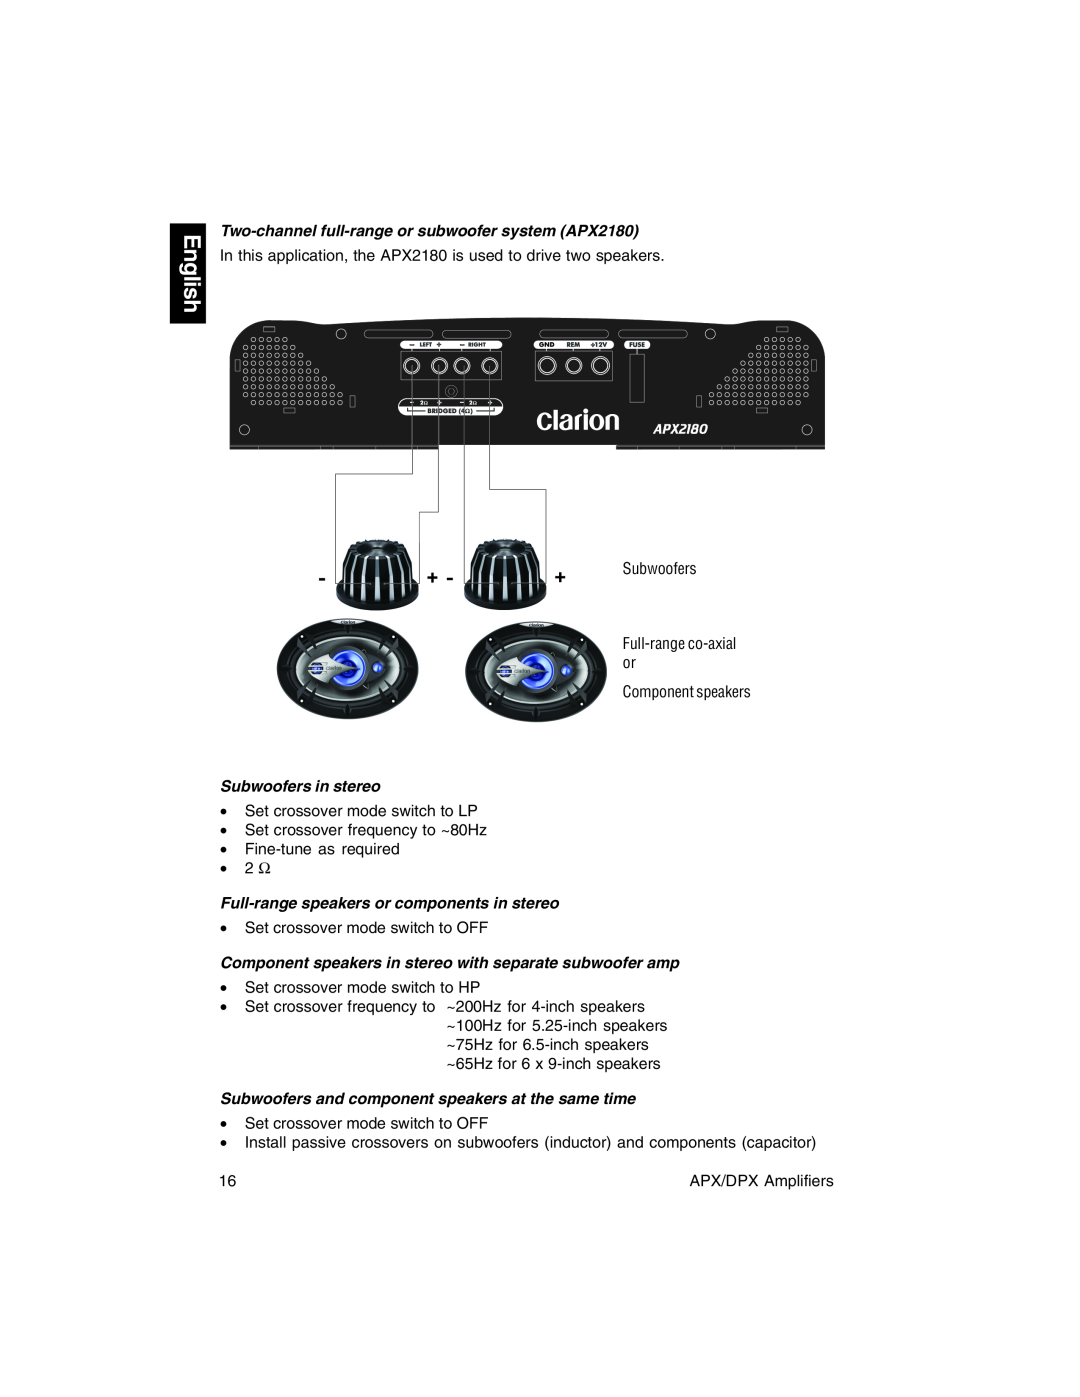 Clarion DPX11500, DPX1800, DPX2250, APX4360 Two-channel full-rangeor subwoofer system APX2180, Subwoofers in stereo, English 